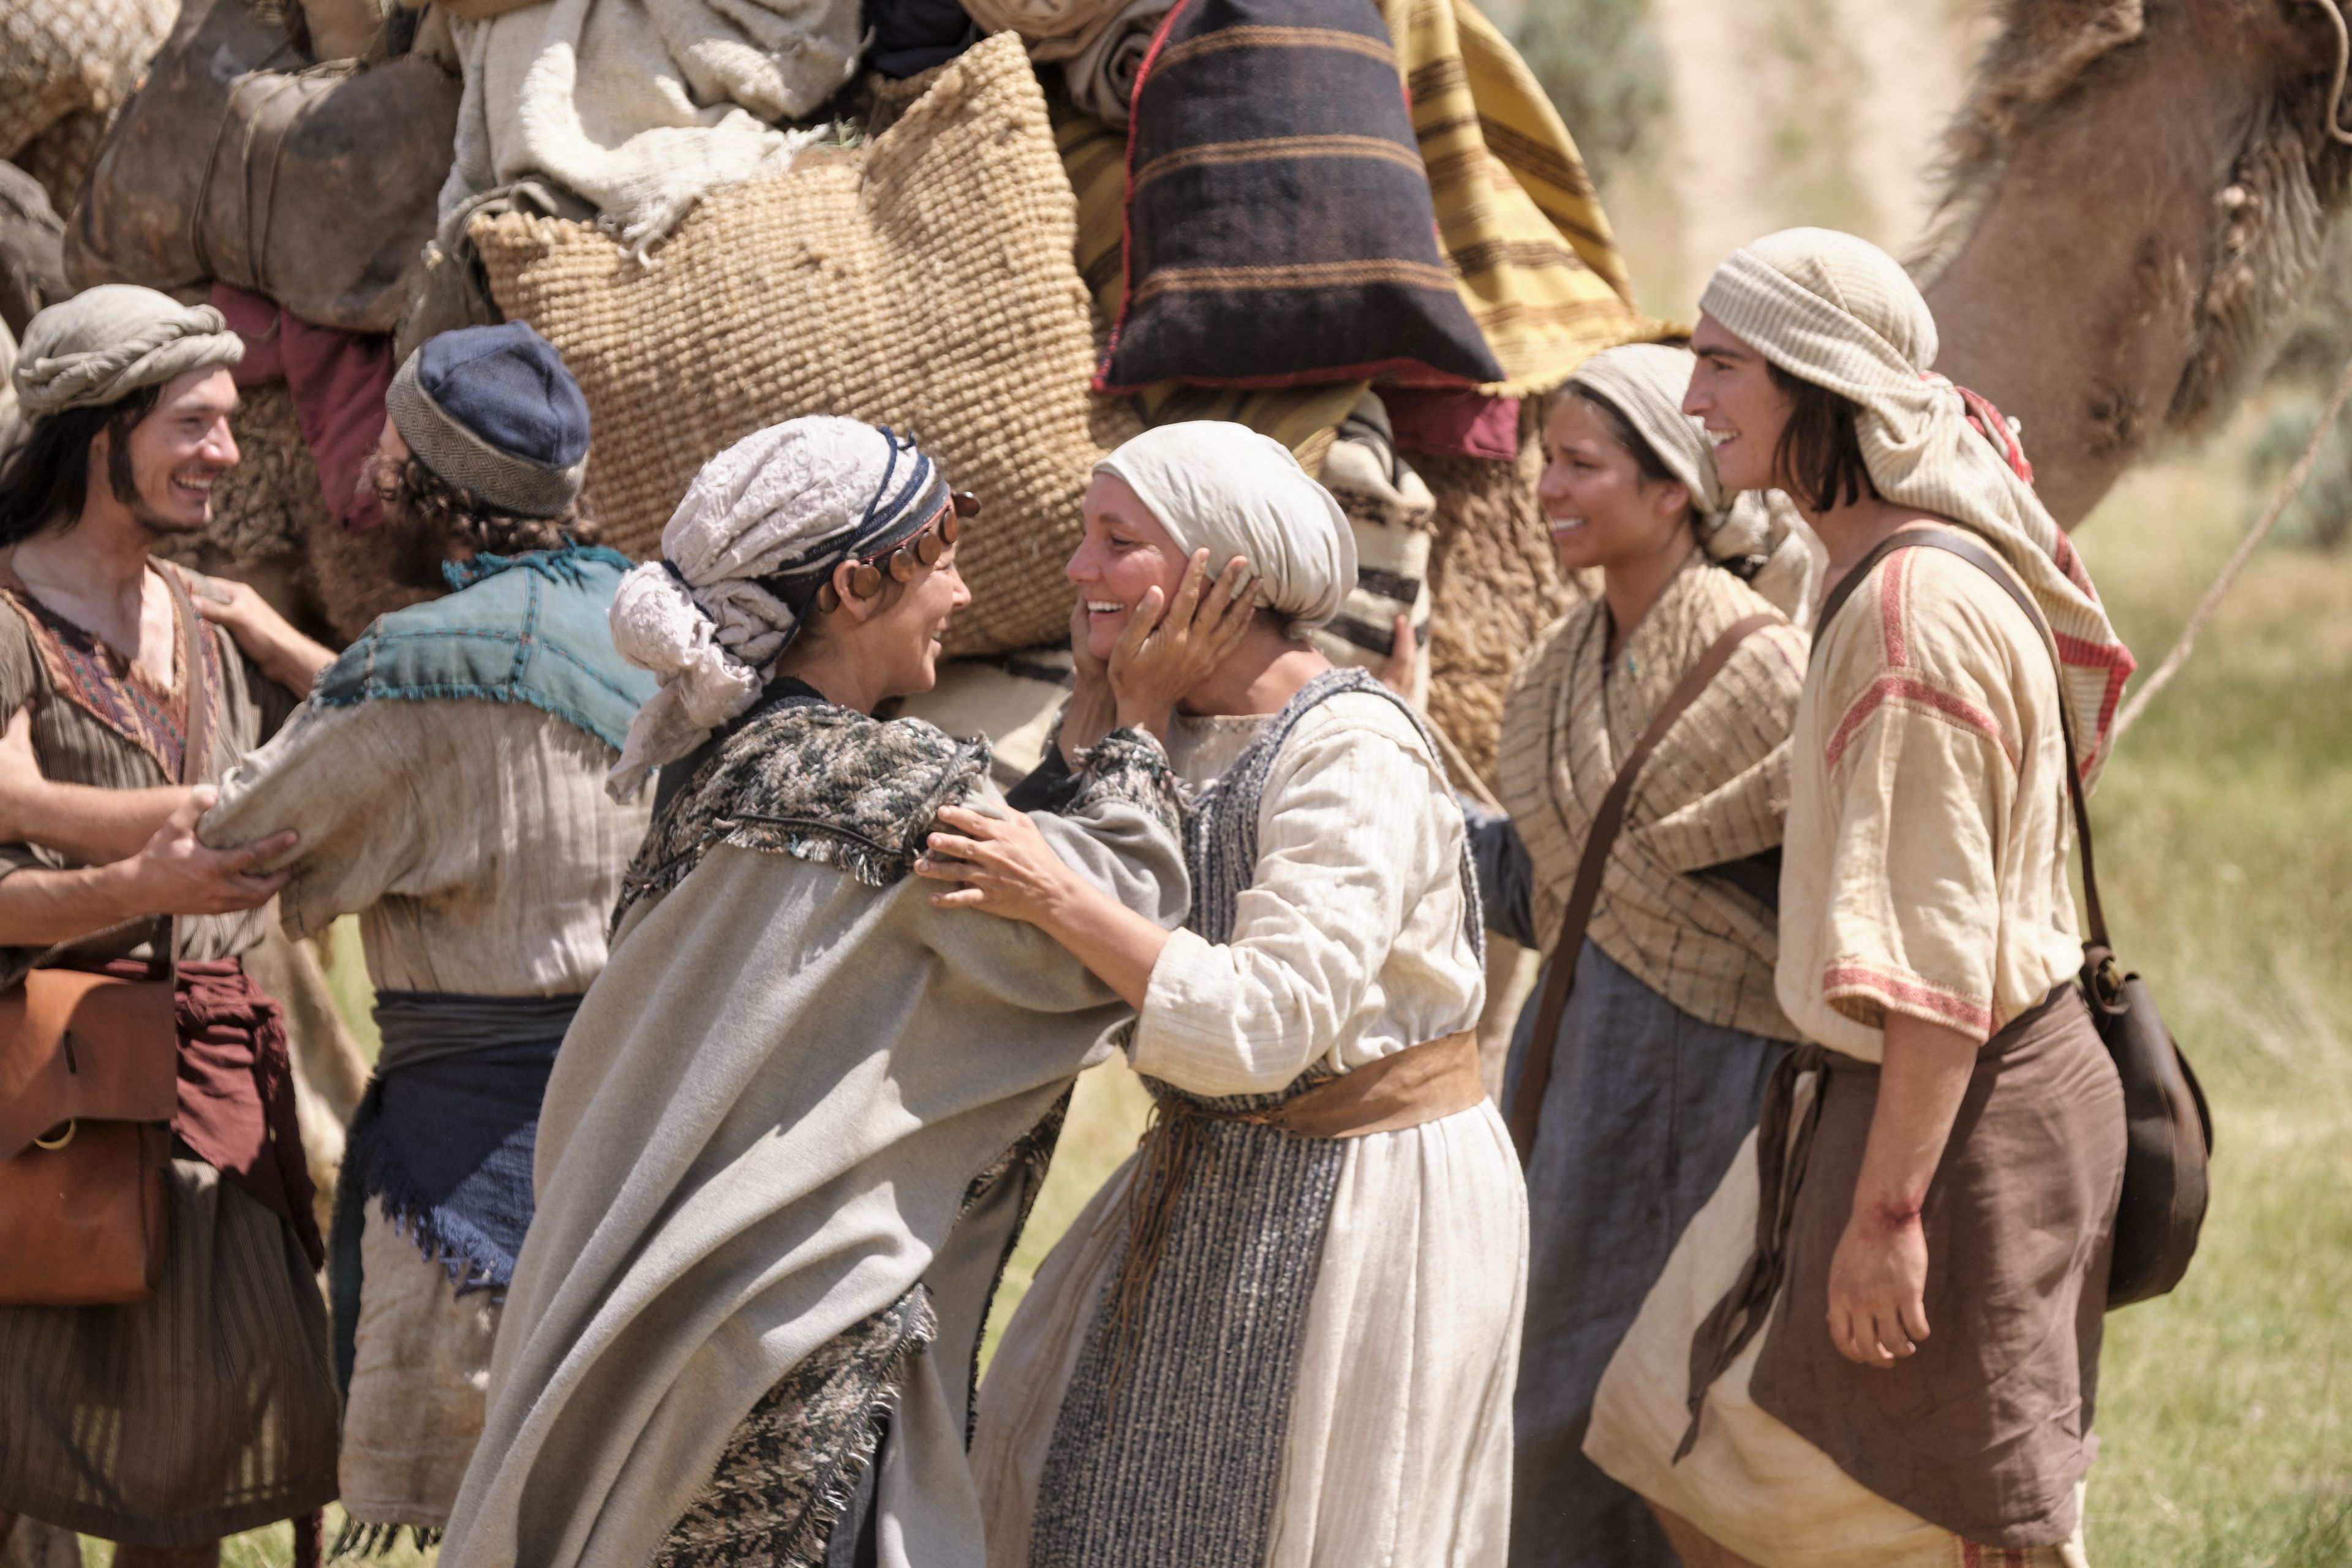 Sariah greets Ishmael's wife as her family joins them in the wilderness.